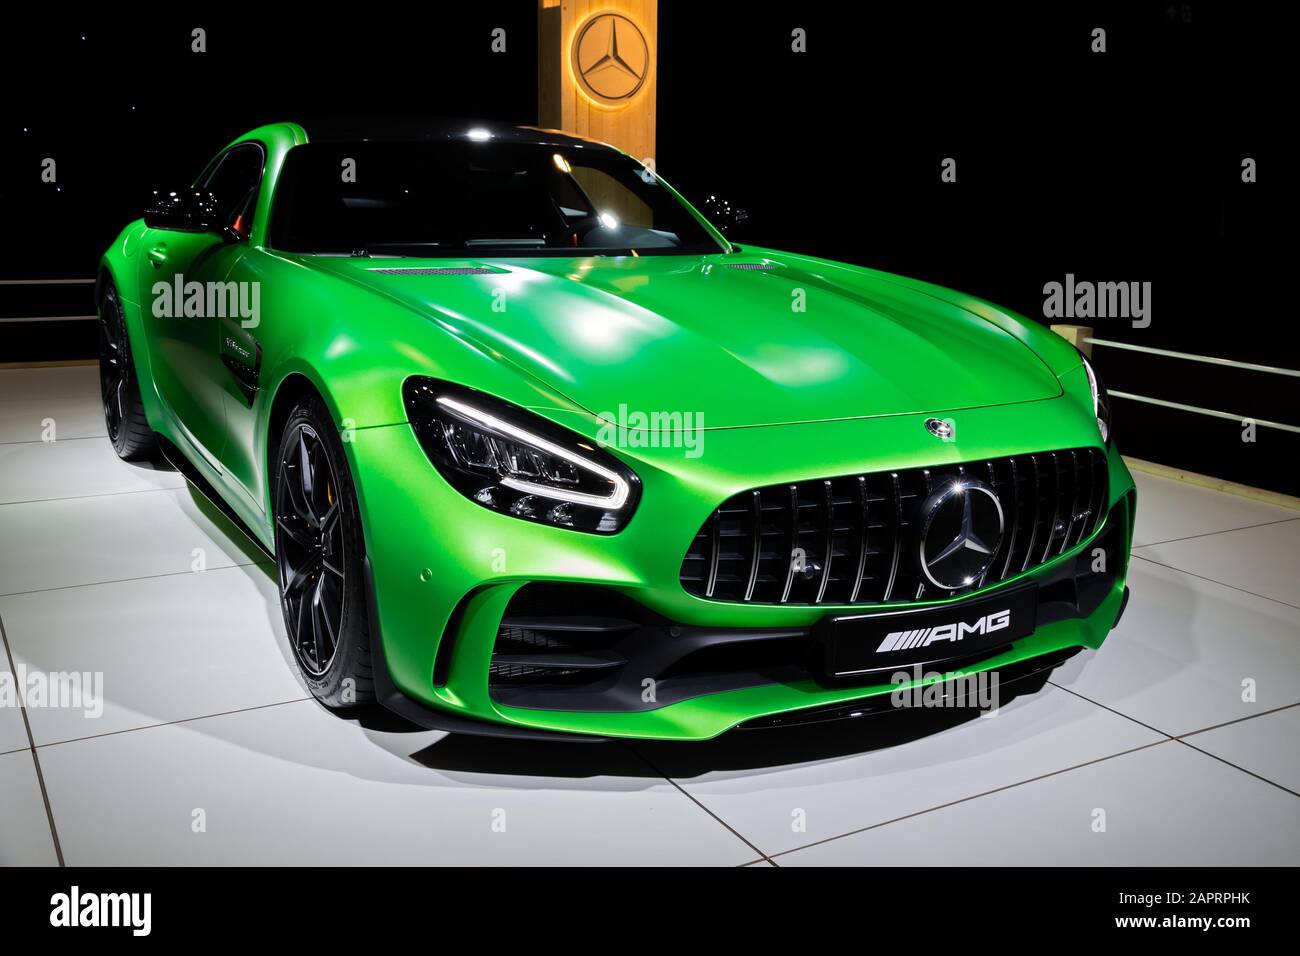 BRUSSELS - JAN 9, 2020: Mercedes-AMG GT R Coupe sports car showcased at the Brussels Autosalon 2020 Motor Show. Stock Photo